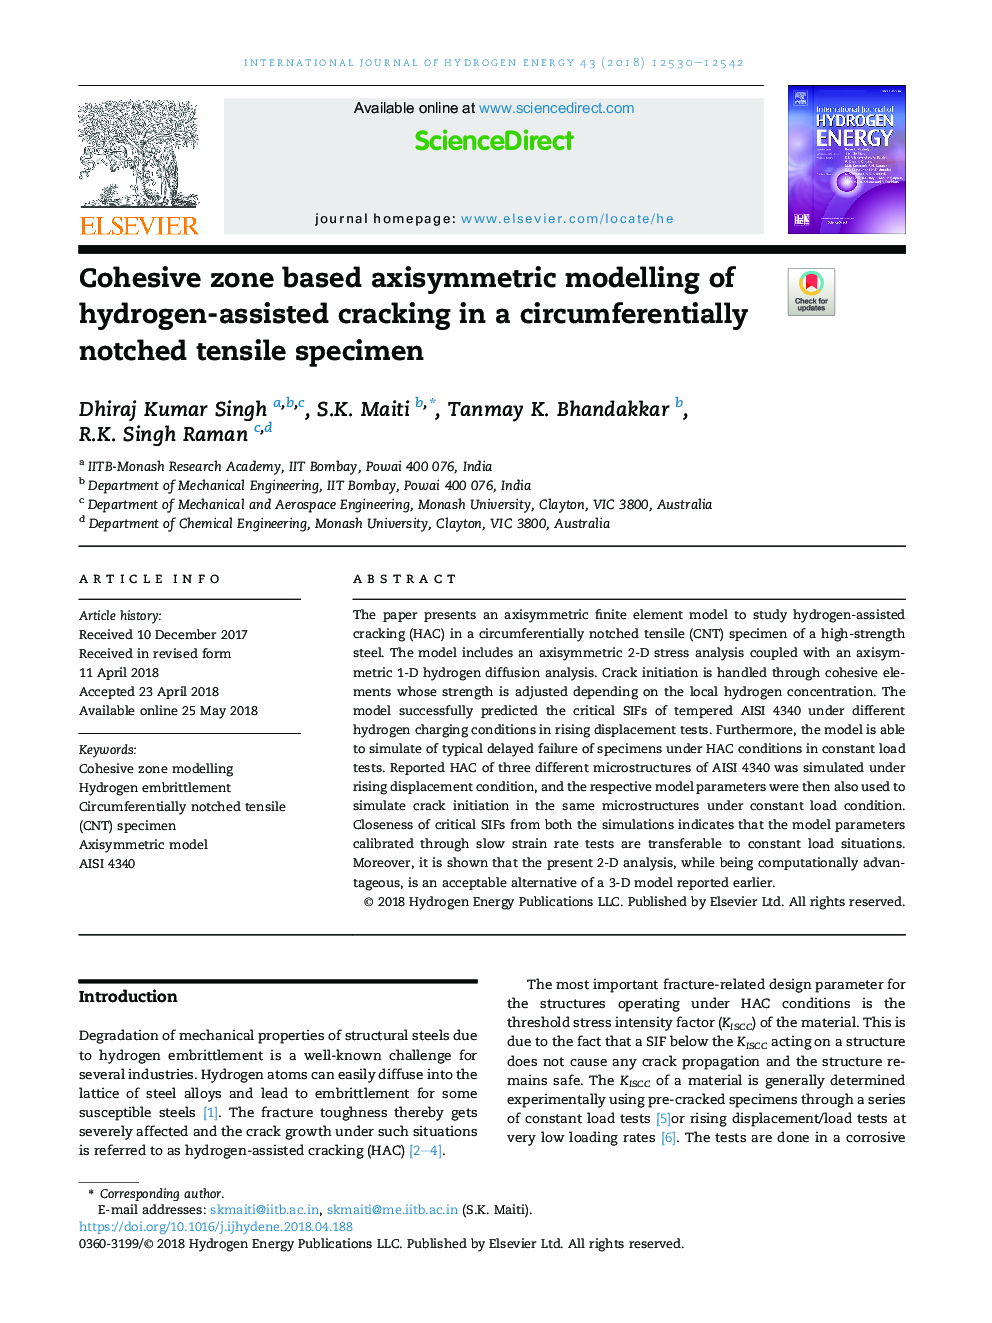 Cohesive zone based axisymmetric modelling of hydrogen-assisted cracking in a circumferentially notched tensile specimen